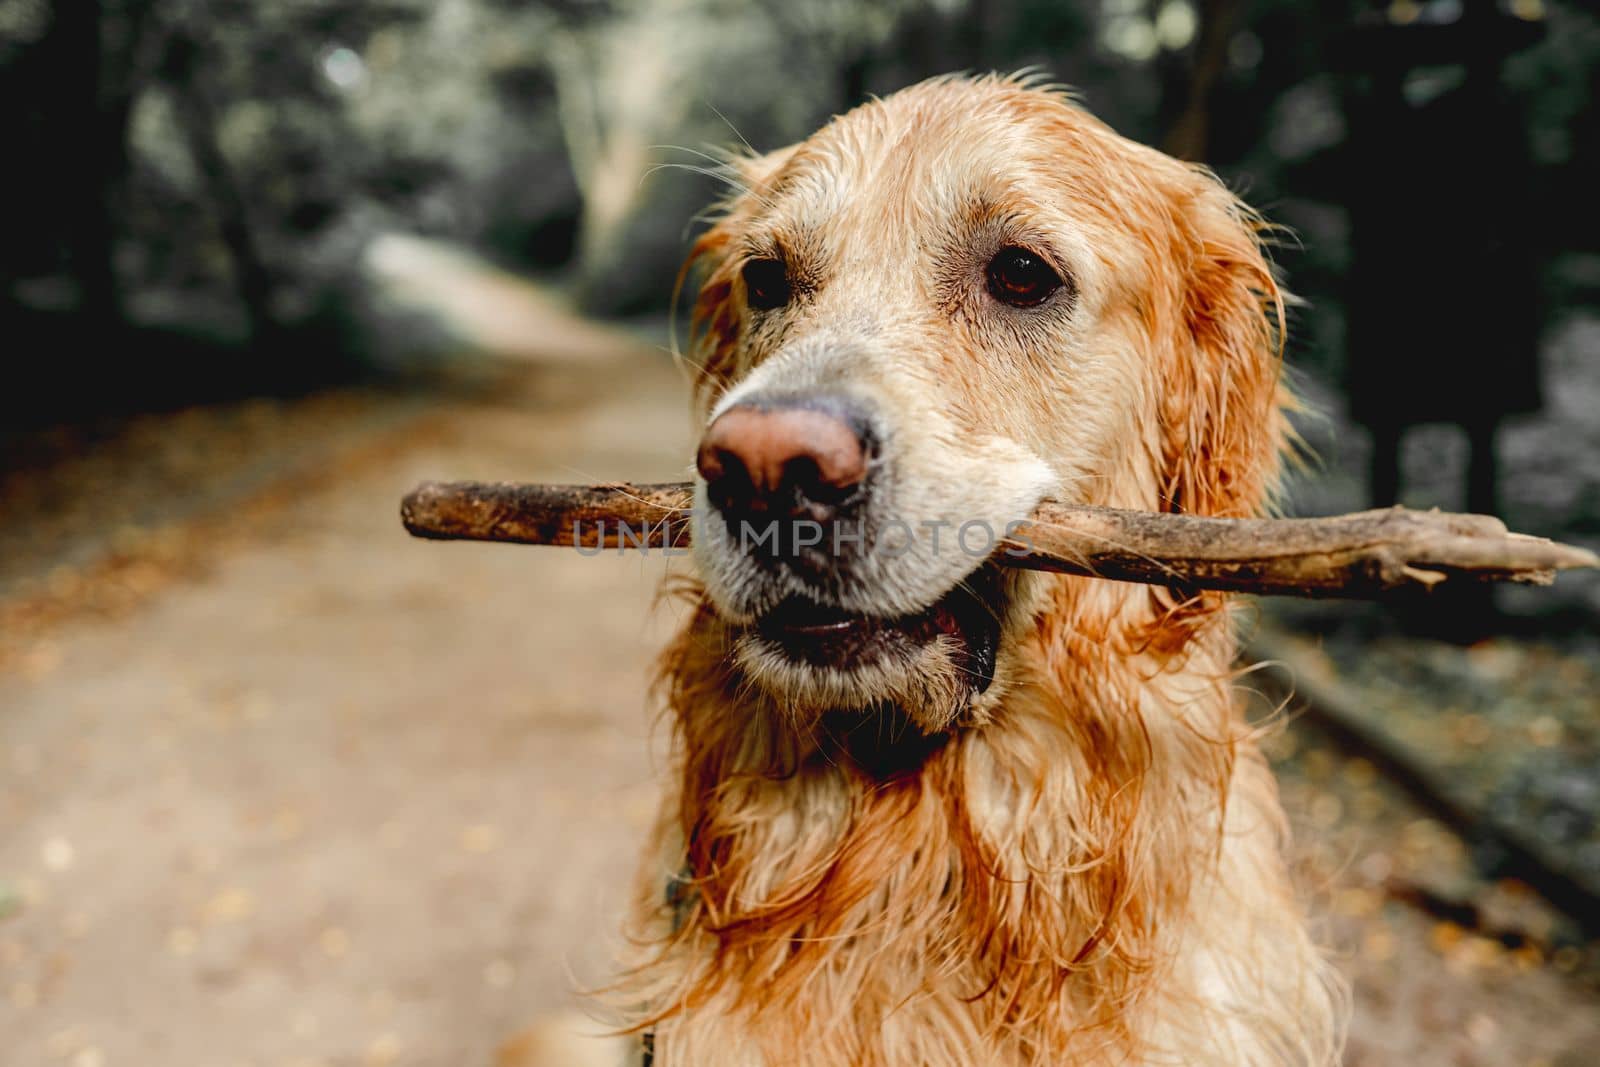 Cute golden retriever dog running with stick in mouth outdoors